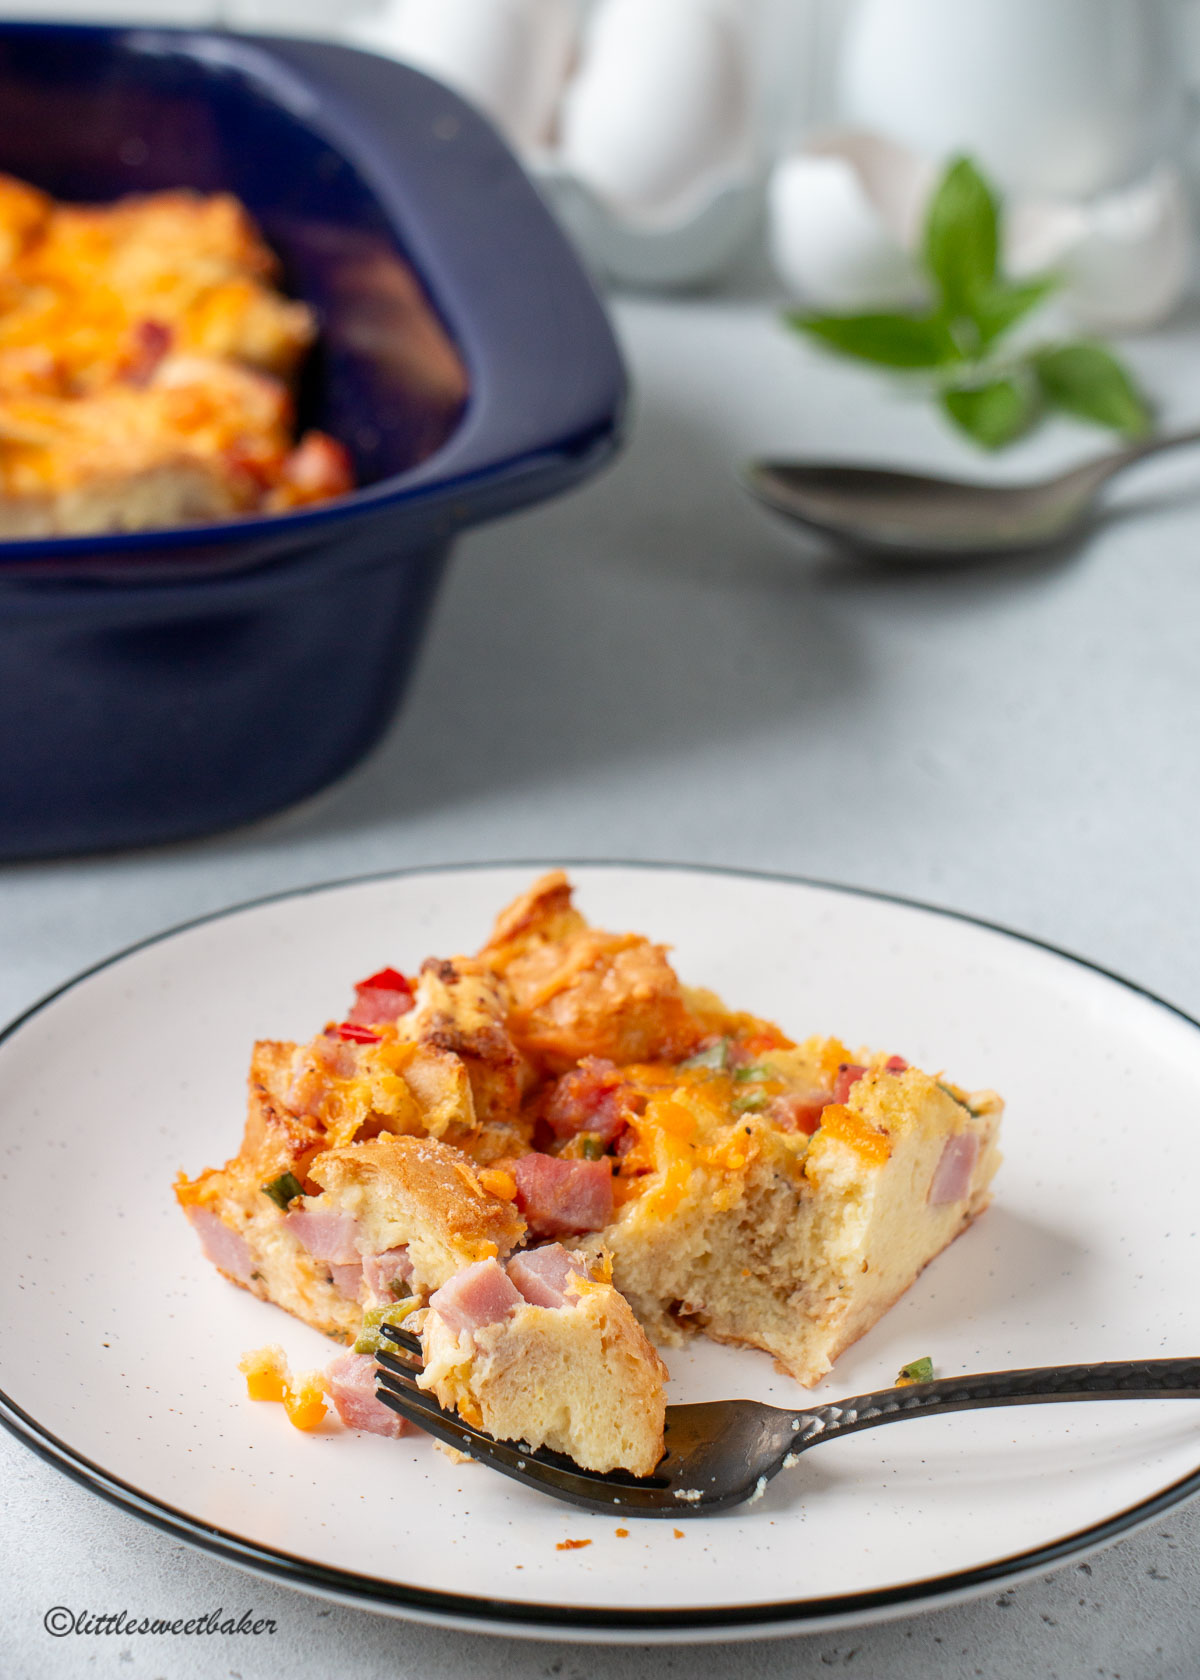 A slice of breakfast casserole on a plate with a piece on a fork.